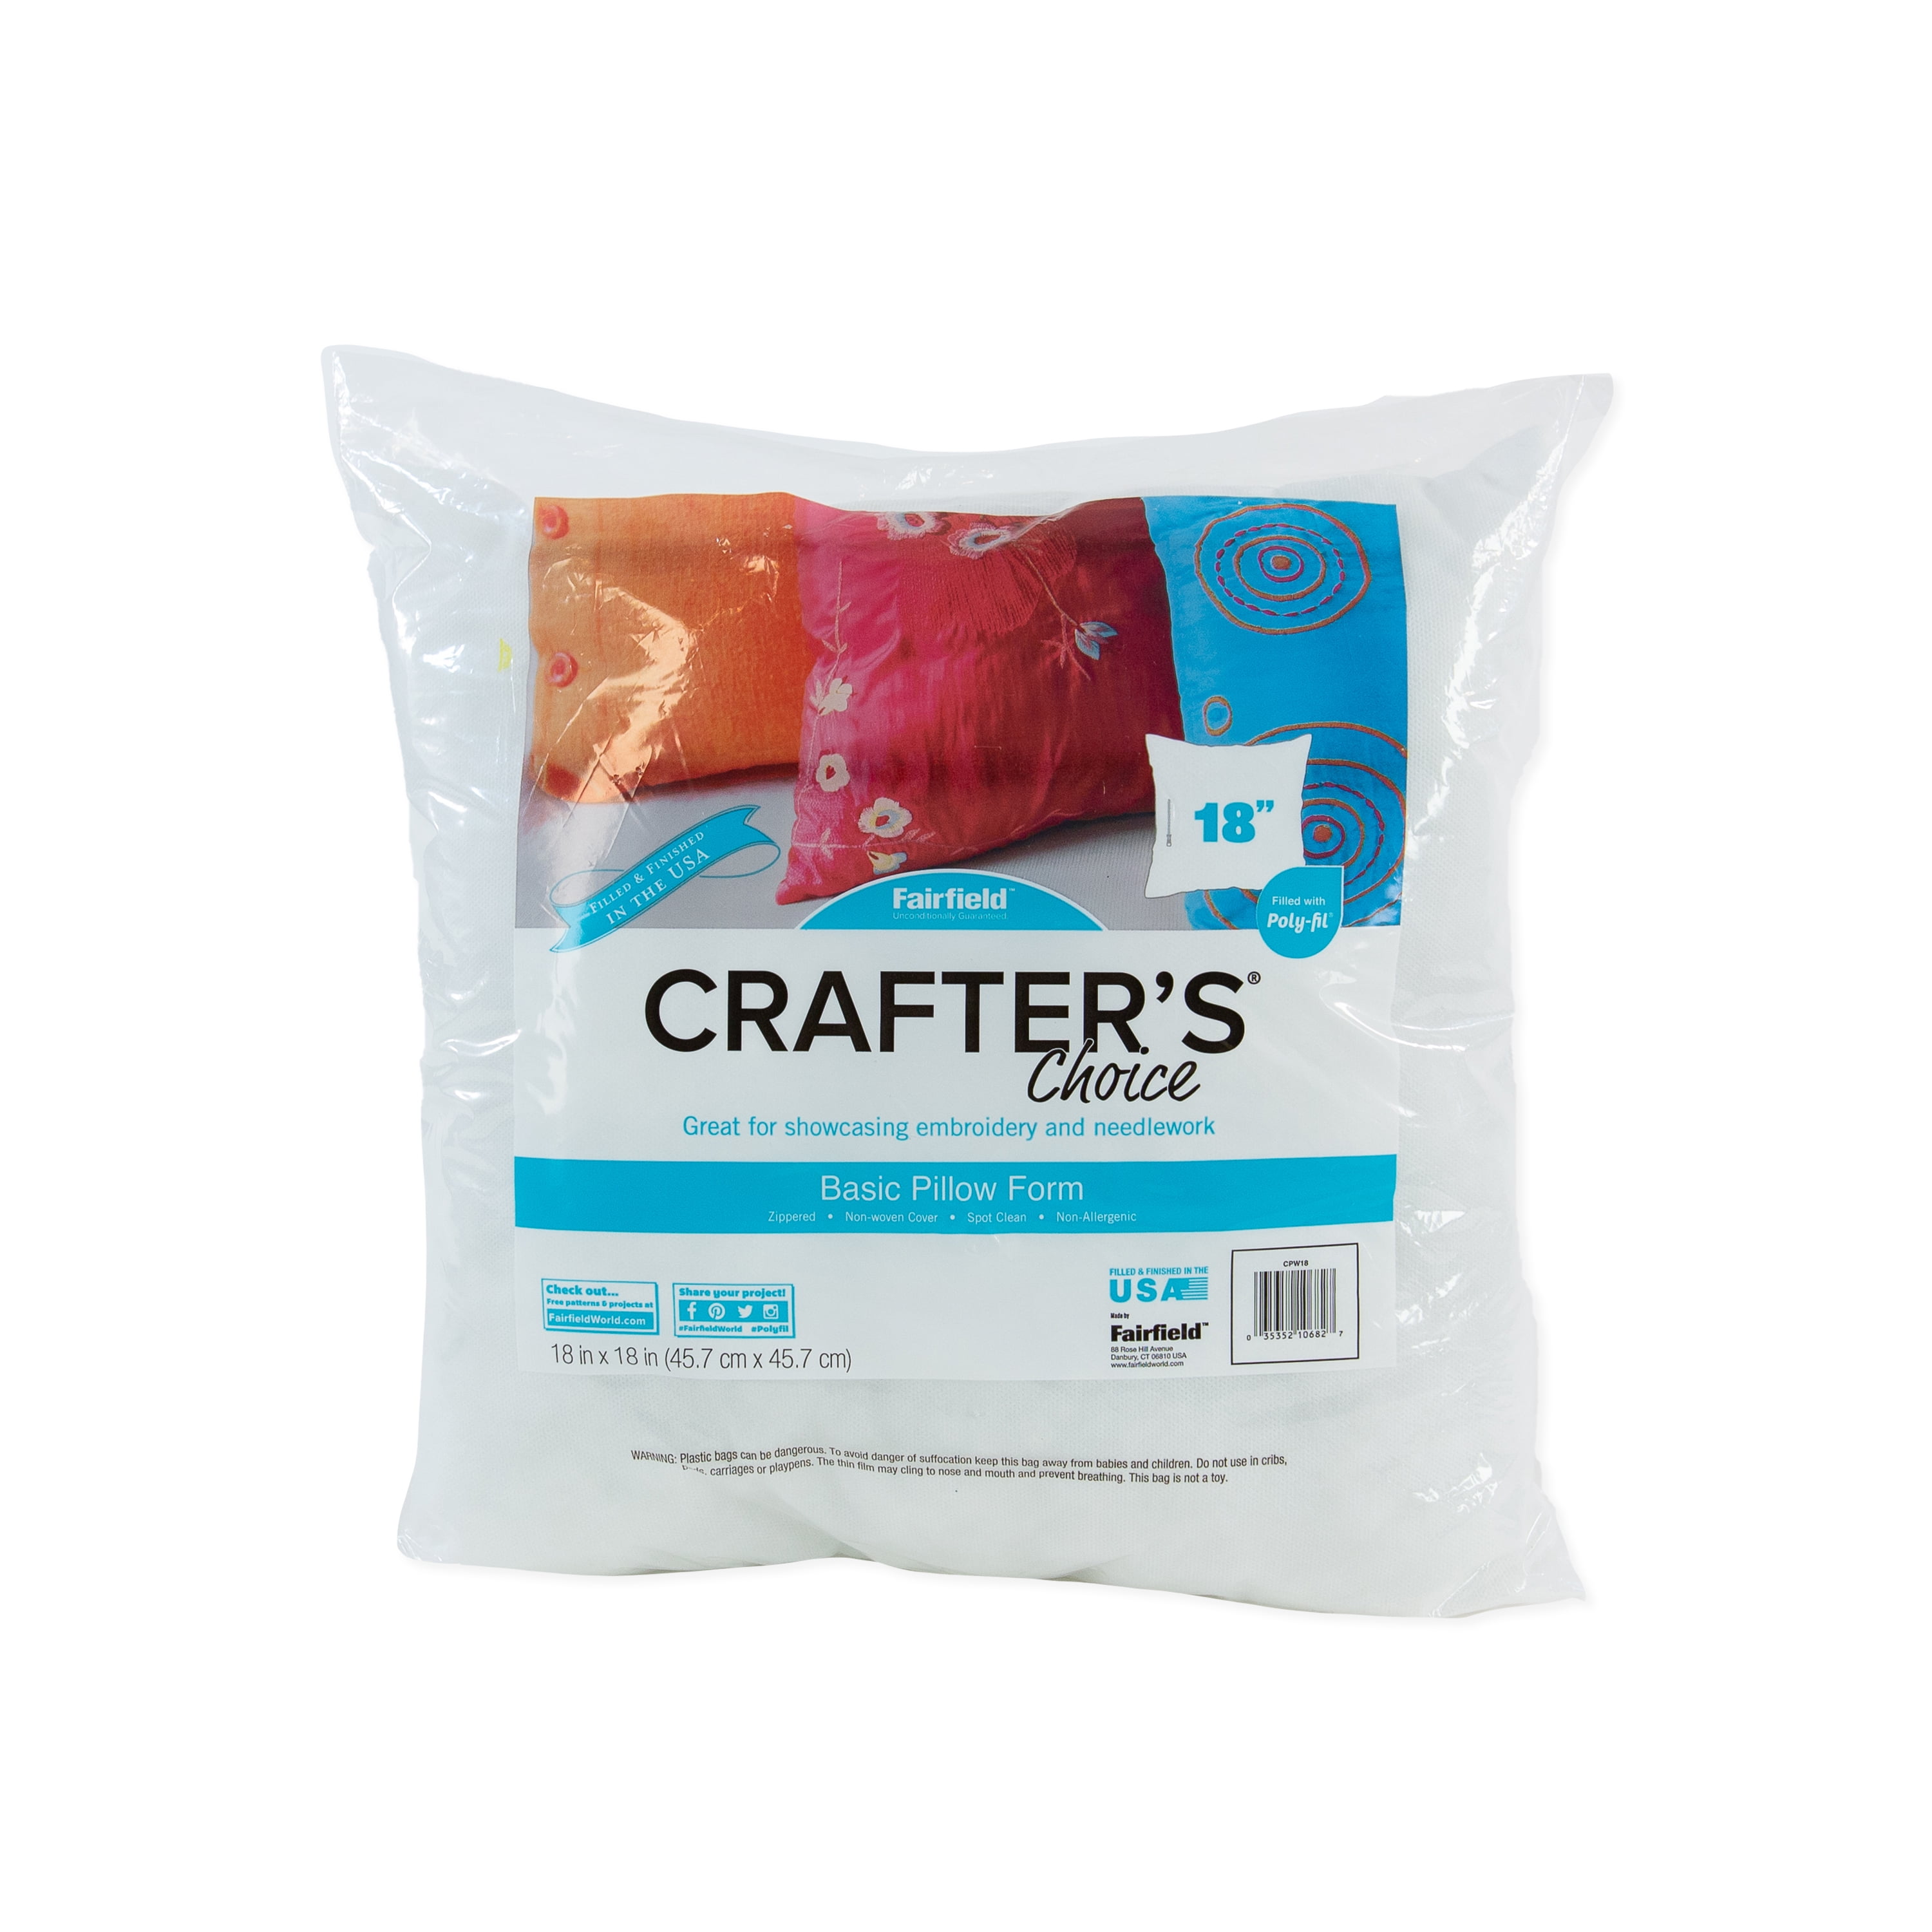 Crafters Choice Basic Pillow Form Insert 16x16 Non-Allergenic 